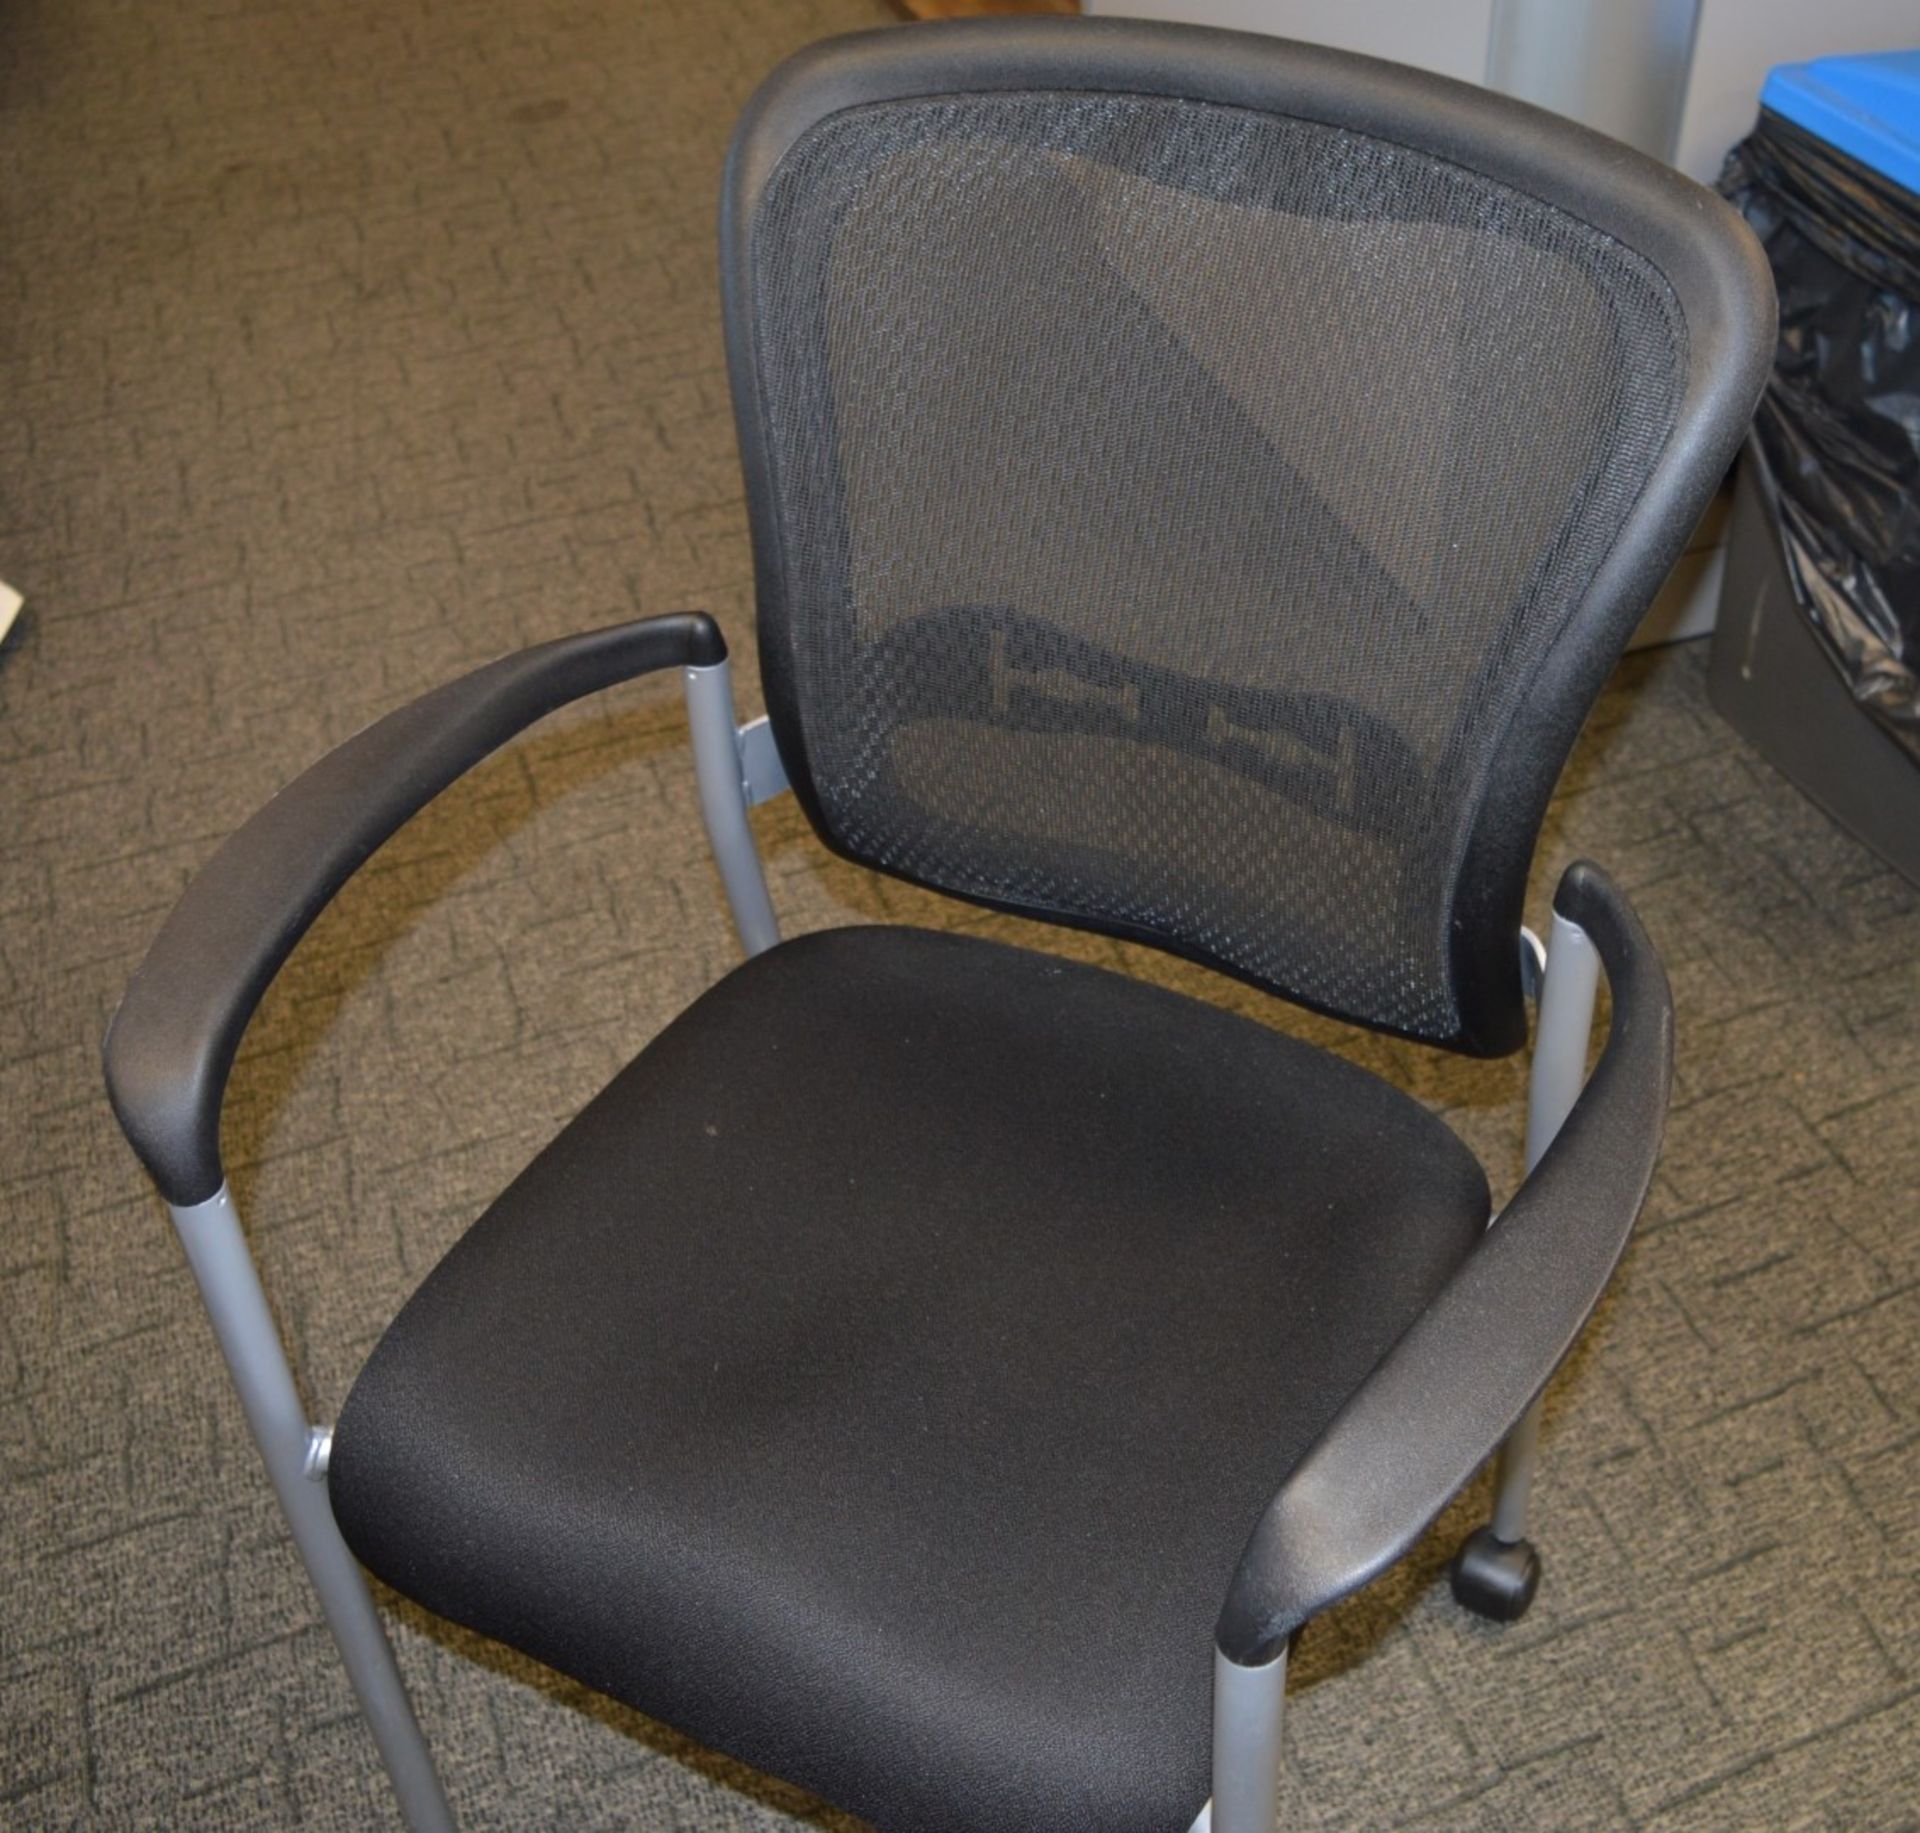 4 x Senator SL829A Office Chairs With Castors - Ergonomical Chairs With Armrests - High Quality - Image 3 of 5